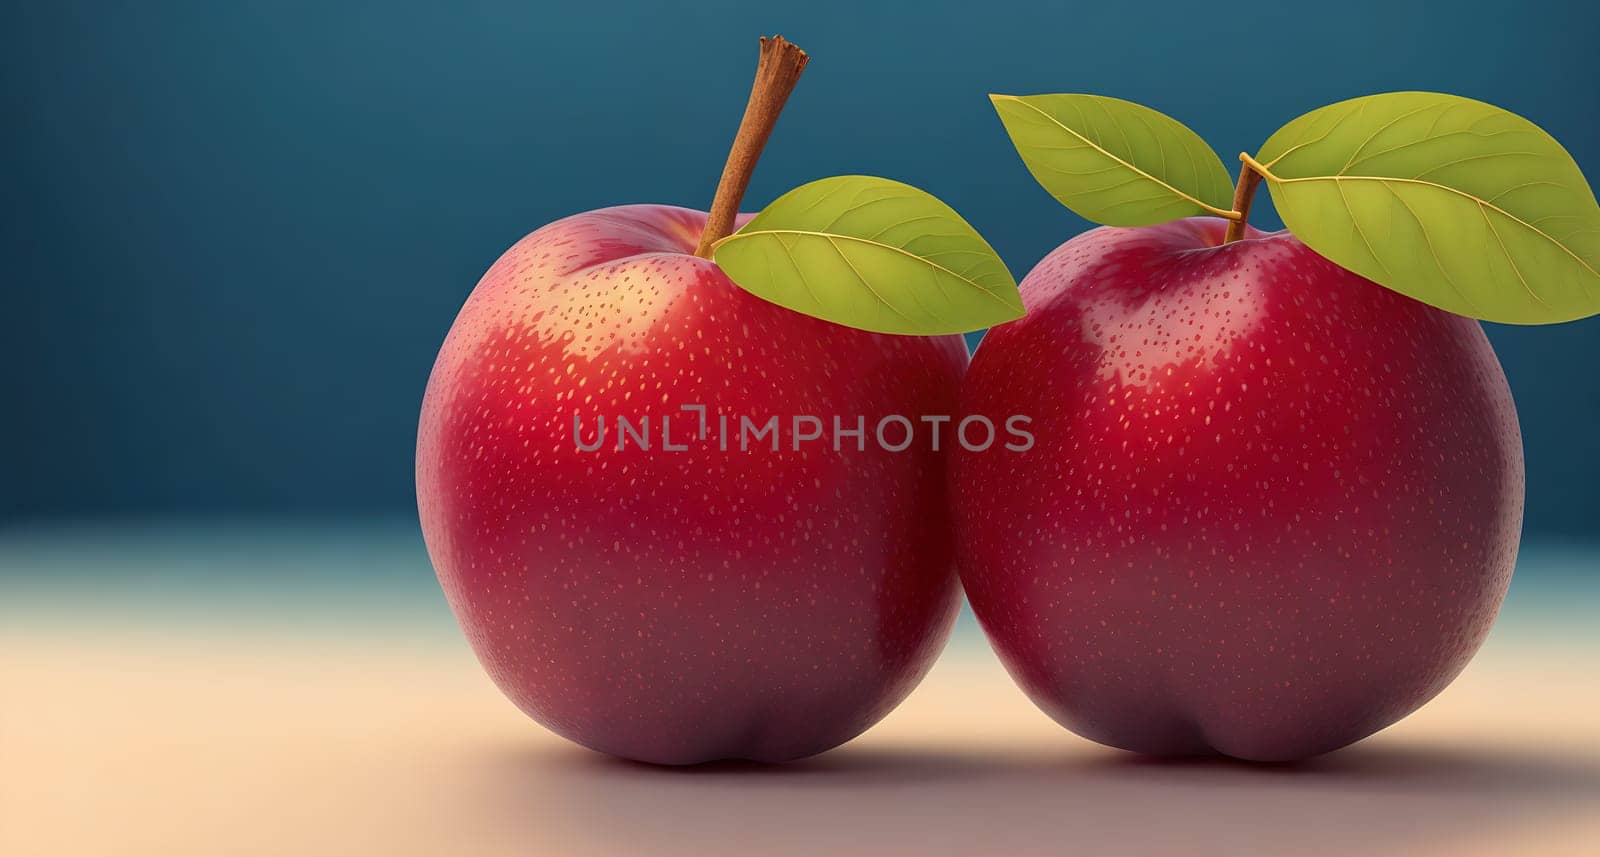 The image depicts two ripe red apples on a green background.